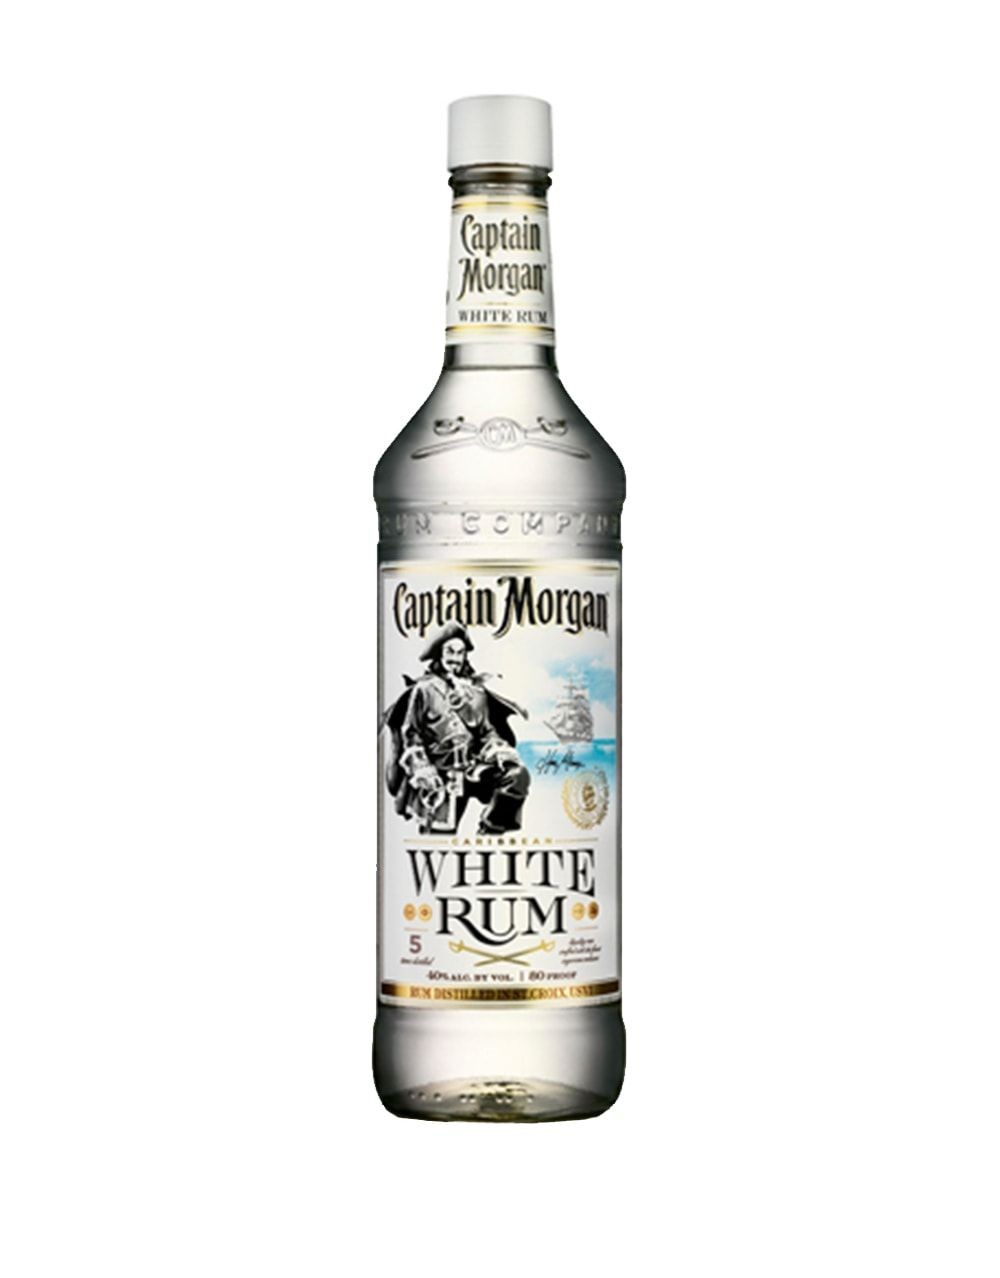 Captain White Rum Buy Online or Send as a Gift